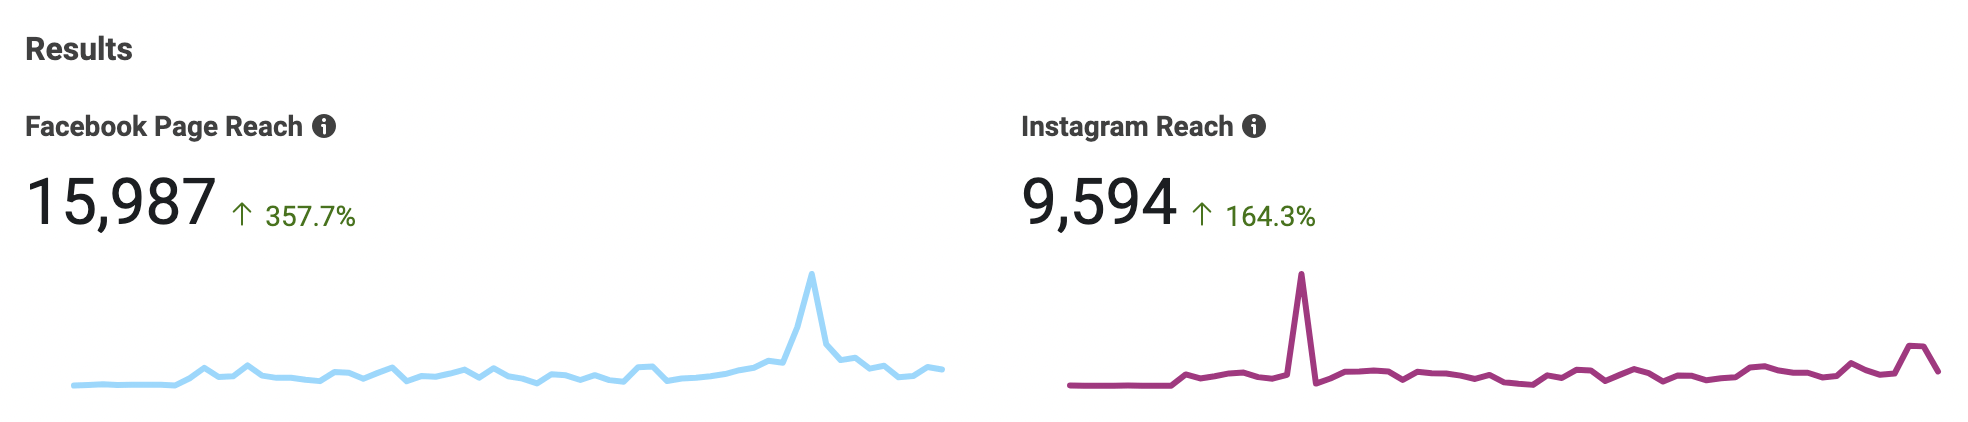 VI's FB + IG Reach Increased Exponentially Under TCF's SMM